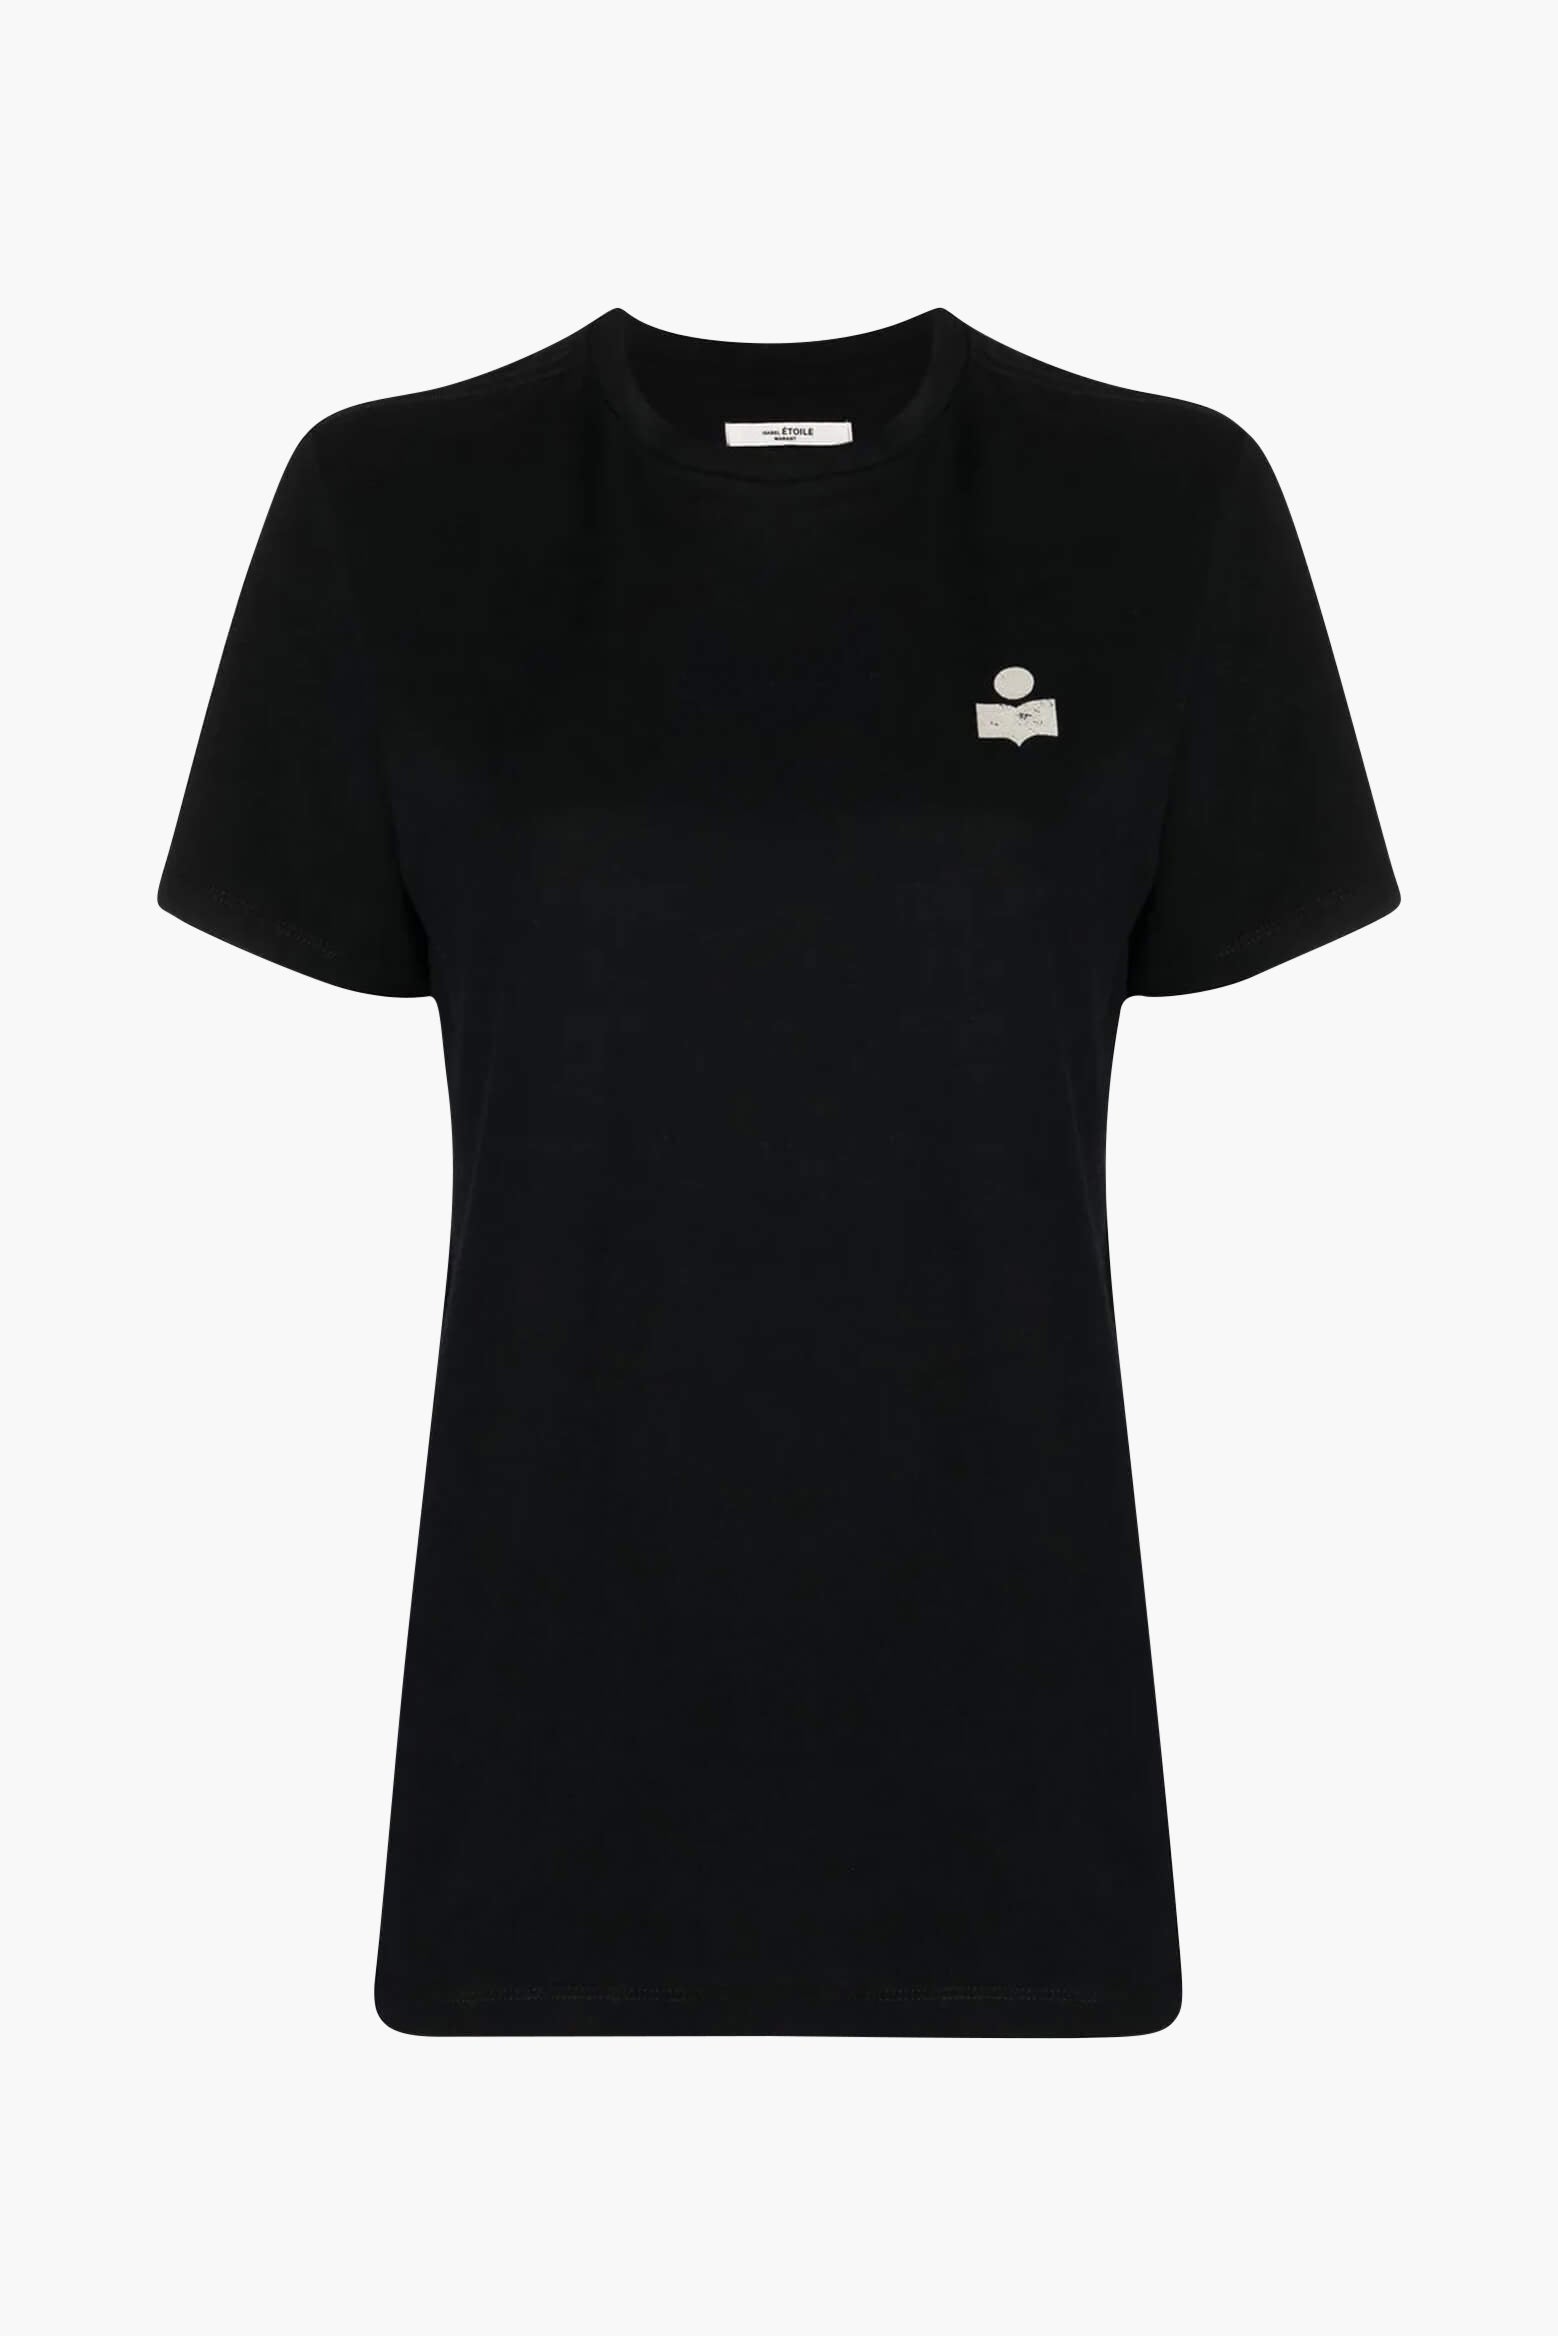 Isabel Marant Etoile Zewel T-Shirt in Black from The New Trend